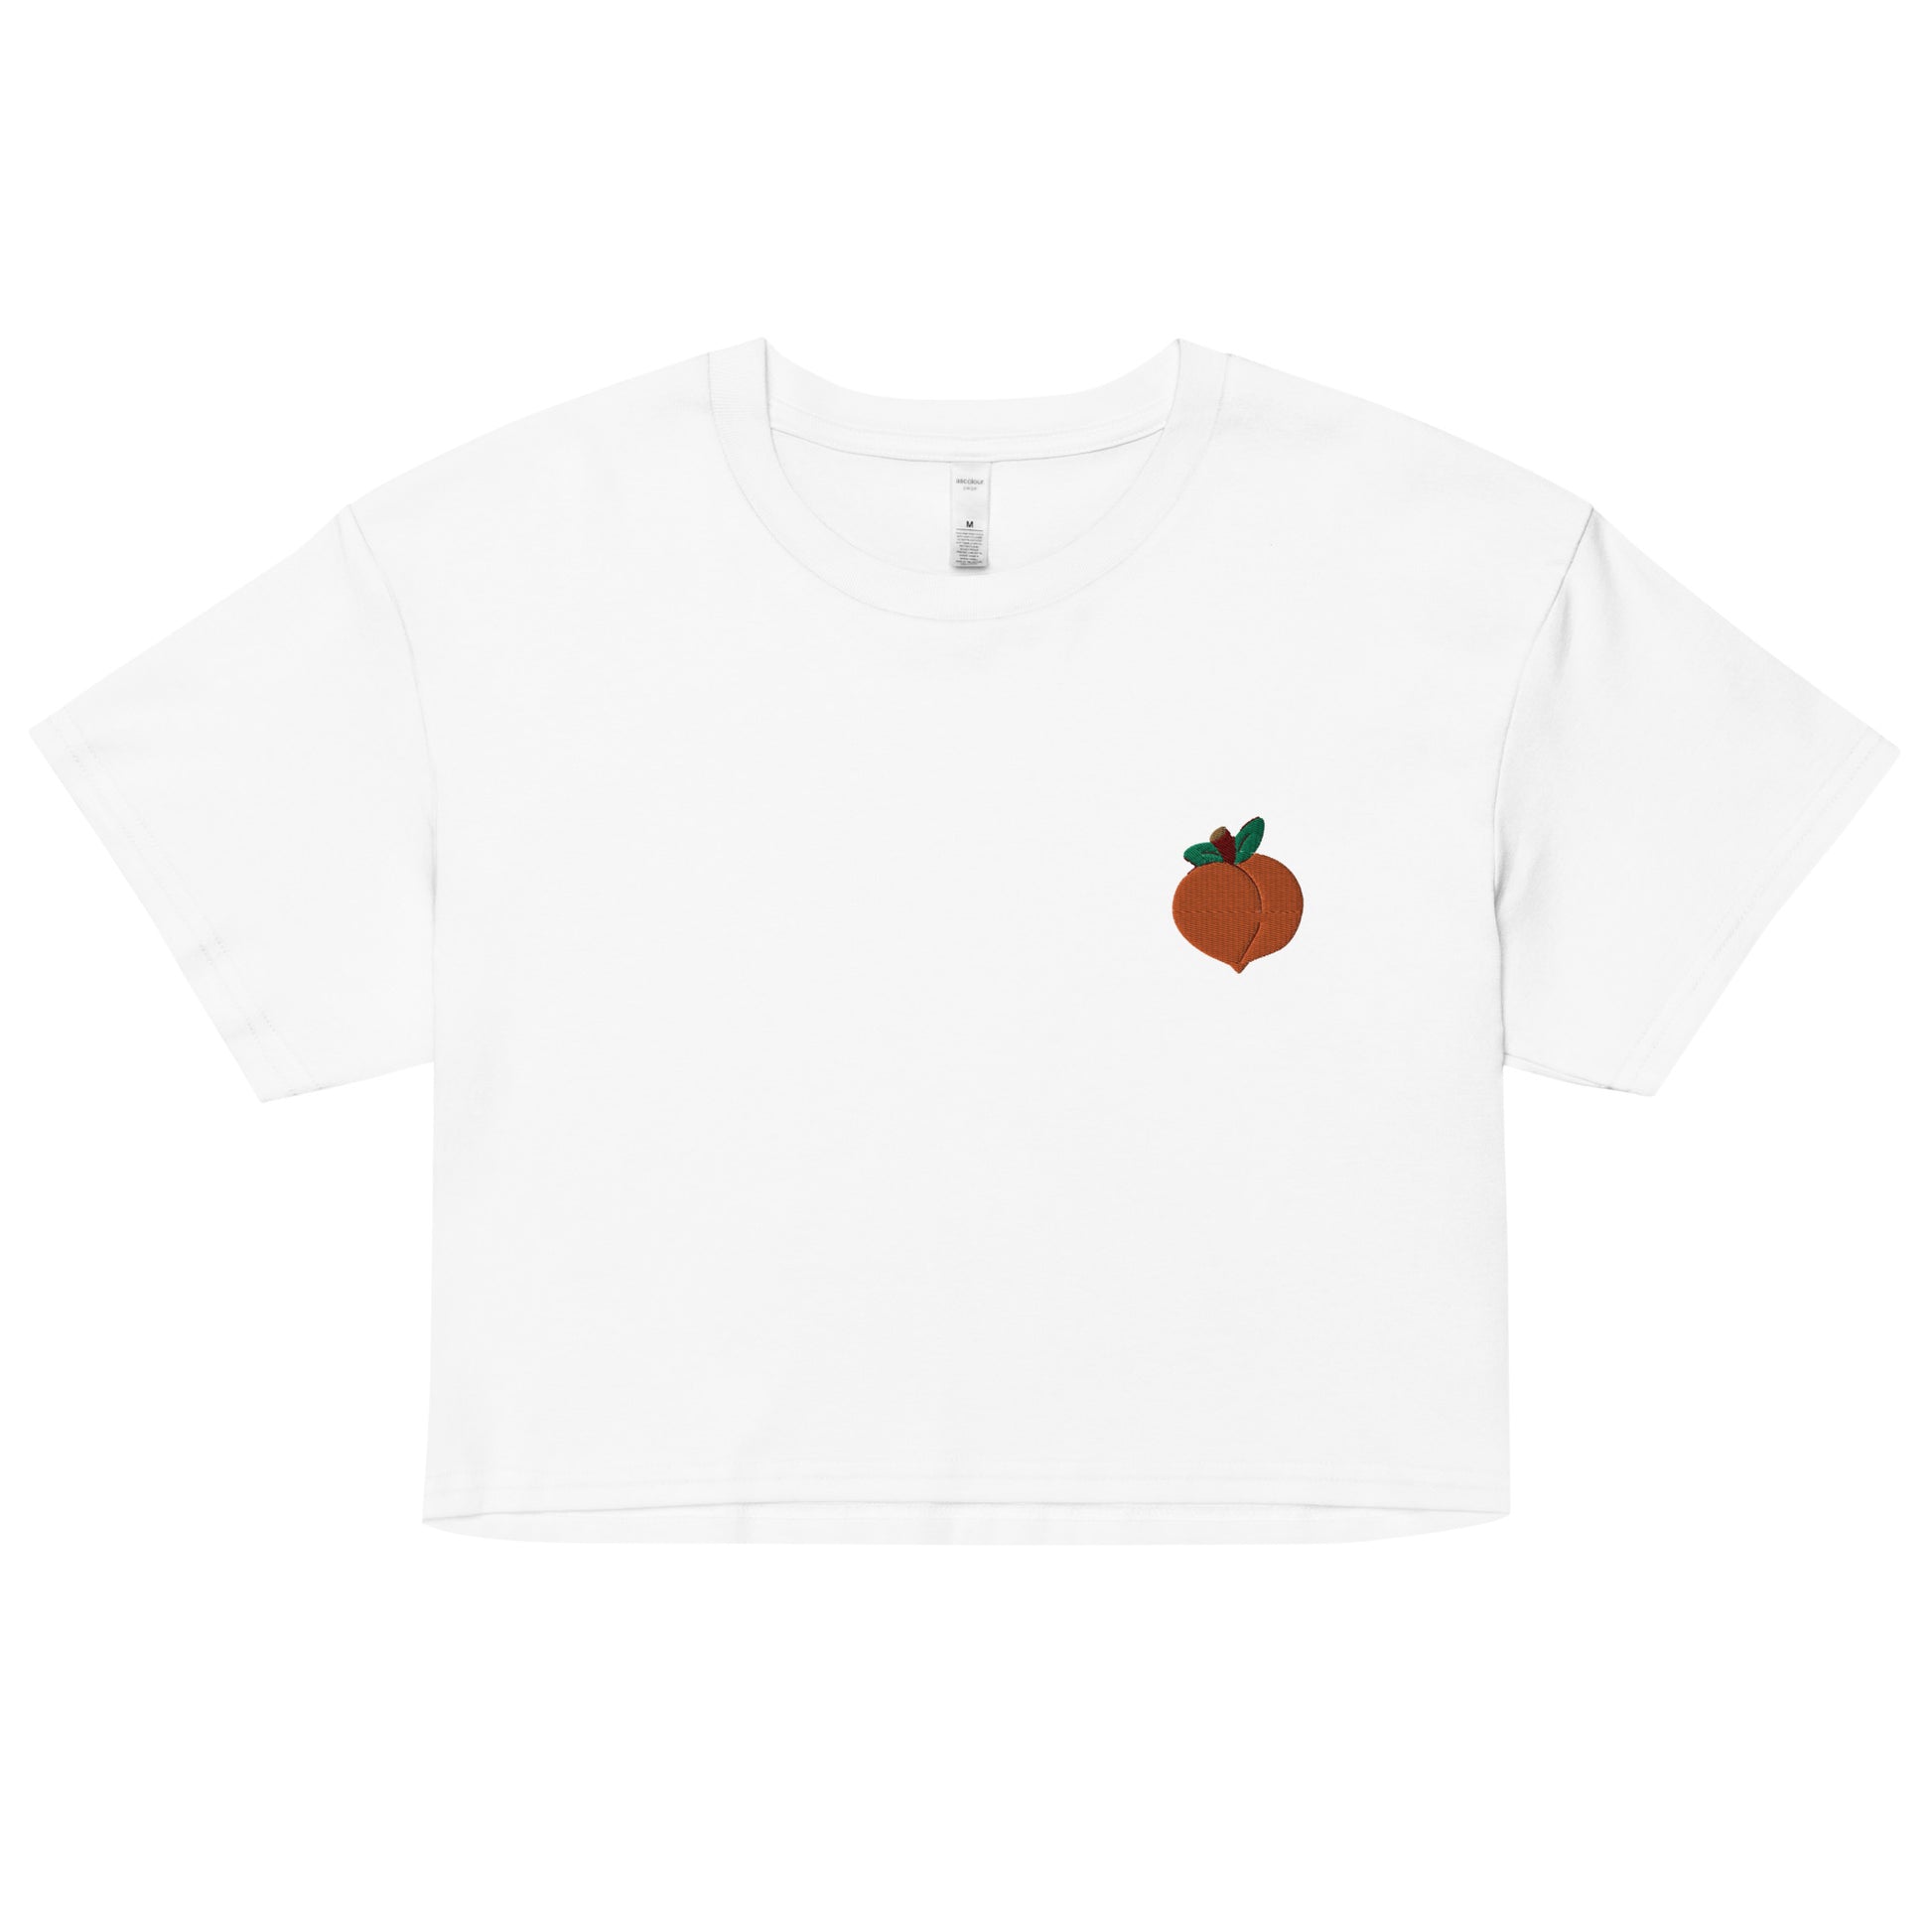 A relaxed, modest white crop top features a subtle peach emoji embroidery. Adding a touch of mischief to your look—a playful celebration of lgbtq culture! Made from 100% combed cotton. Available in Extra Small, Small, Medium, Large, Extra Large.